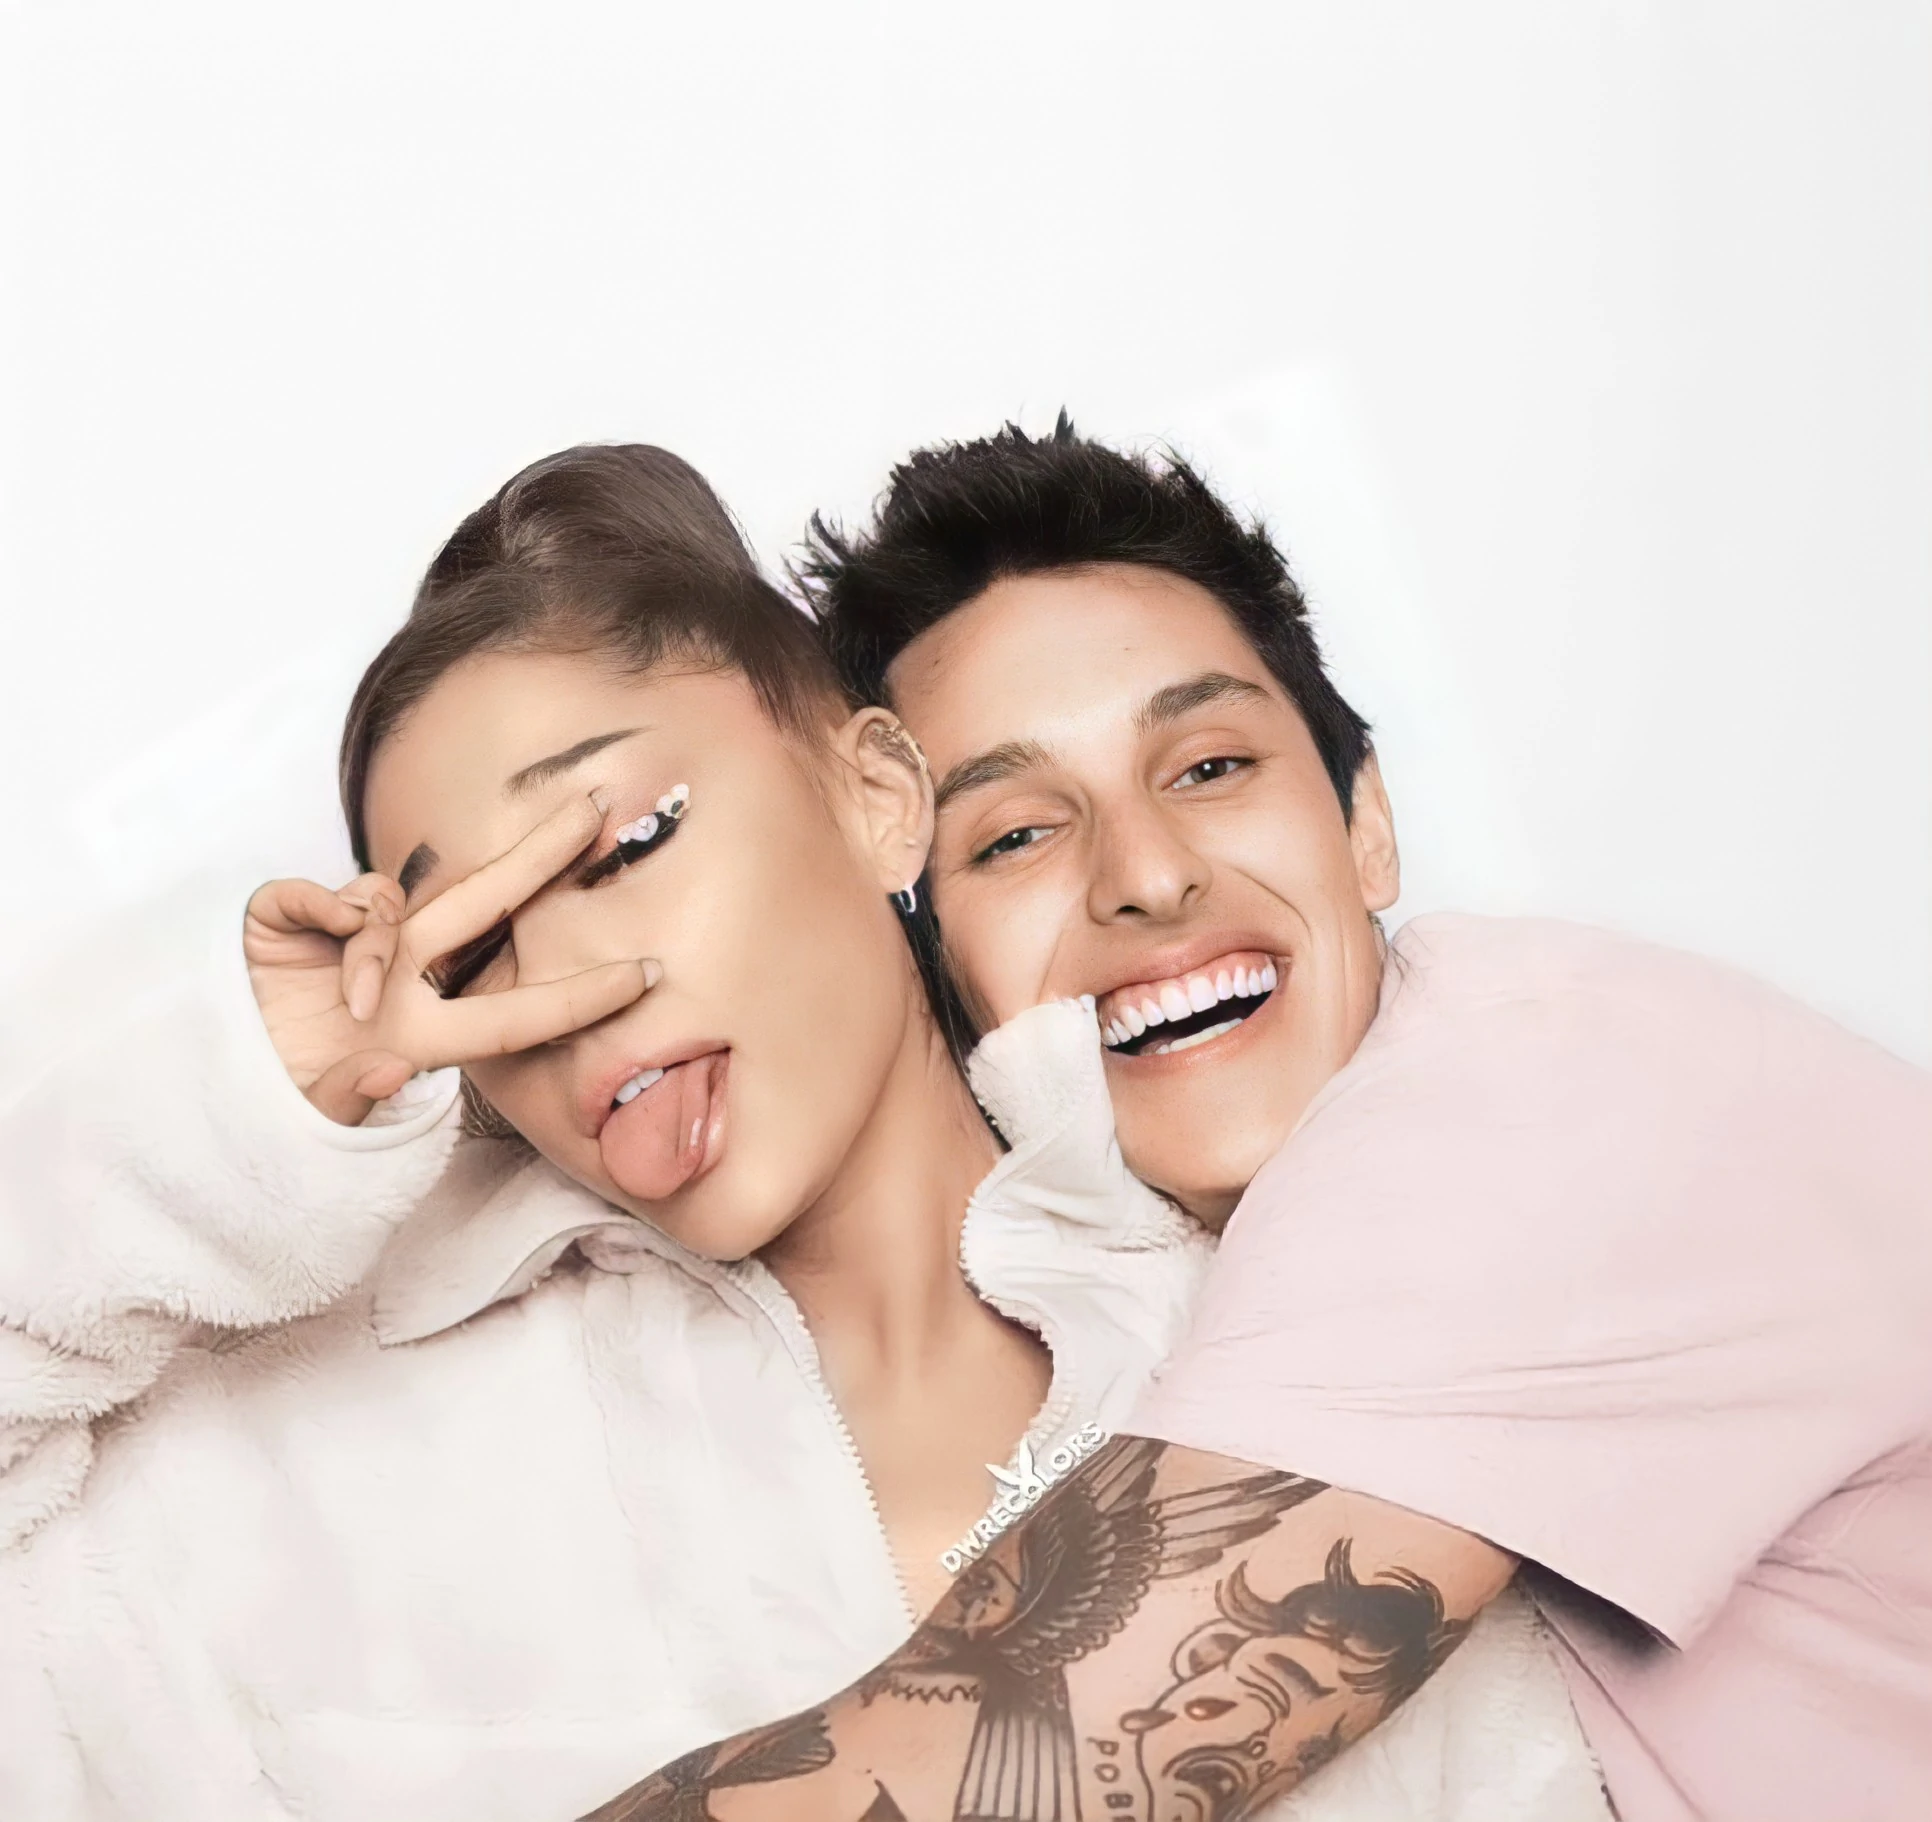 Exploring the Endearing Love Story of Ariana Grande and Dalton Gomez